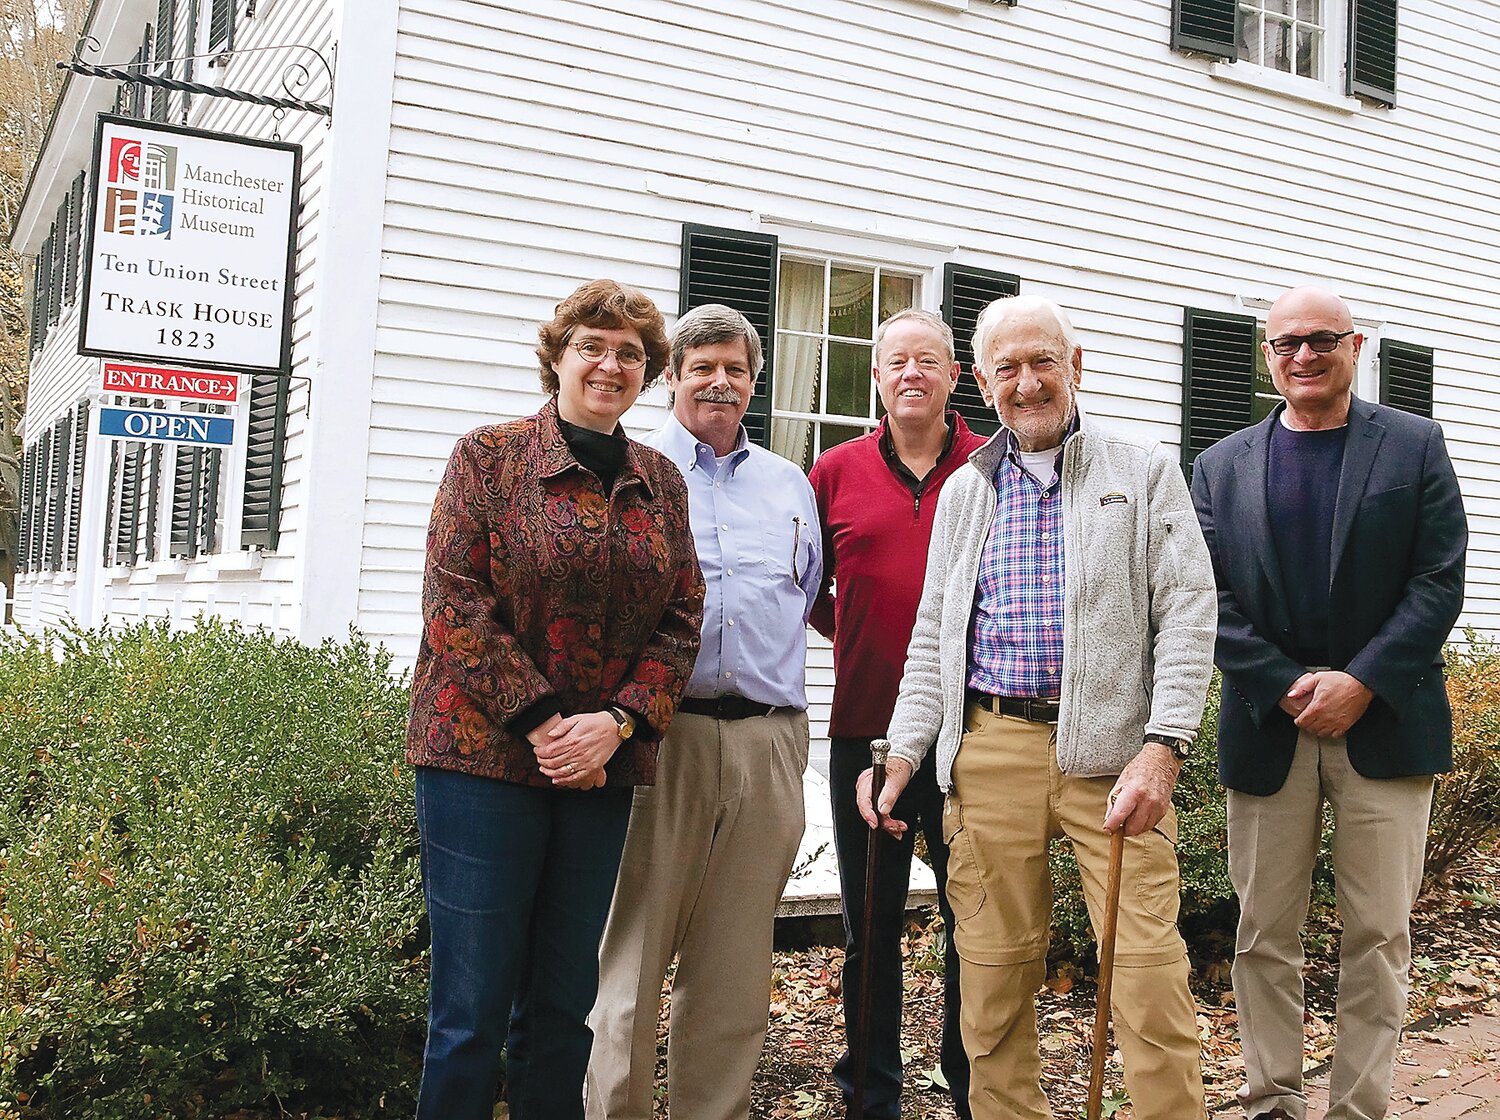 From left, Beth Wellin, Manchester Historical Museum executive director, Elder Brethren’s Mike Chapman and Joe Willwerth (currently president), Gordon MacDougal (holding both canes), and Rus Brown, 2021 museum president